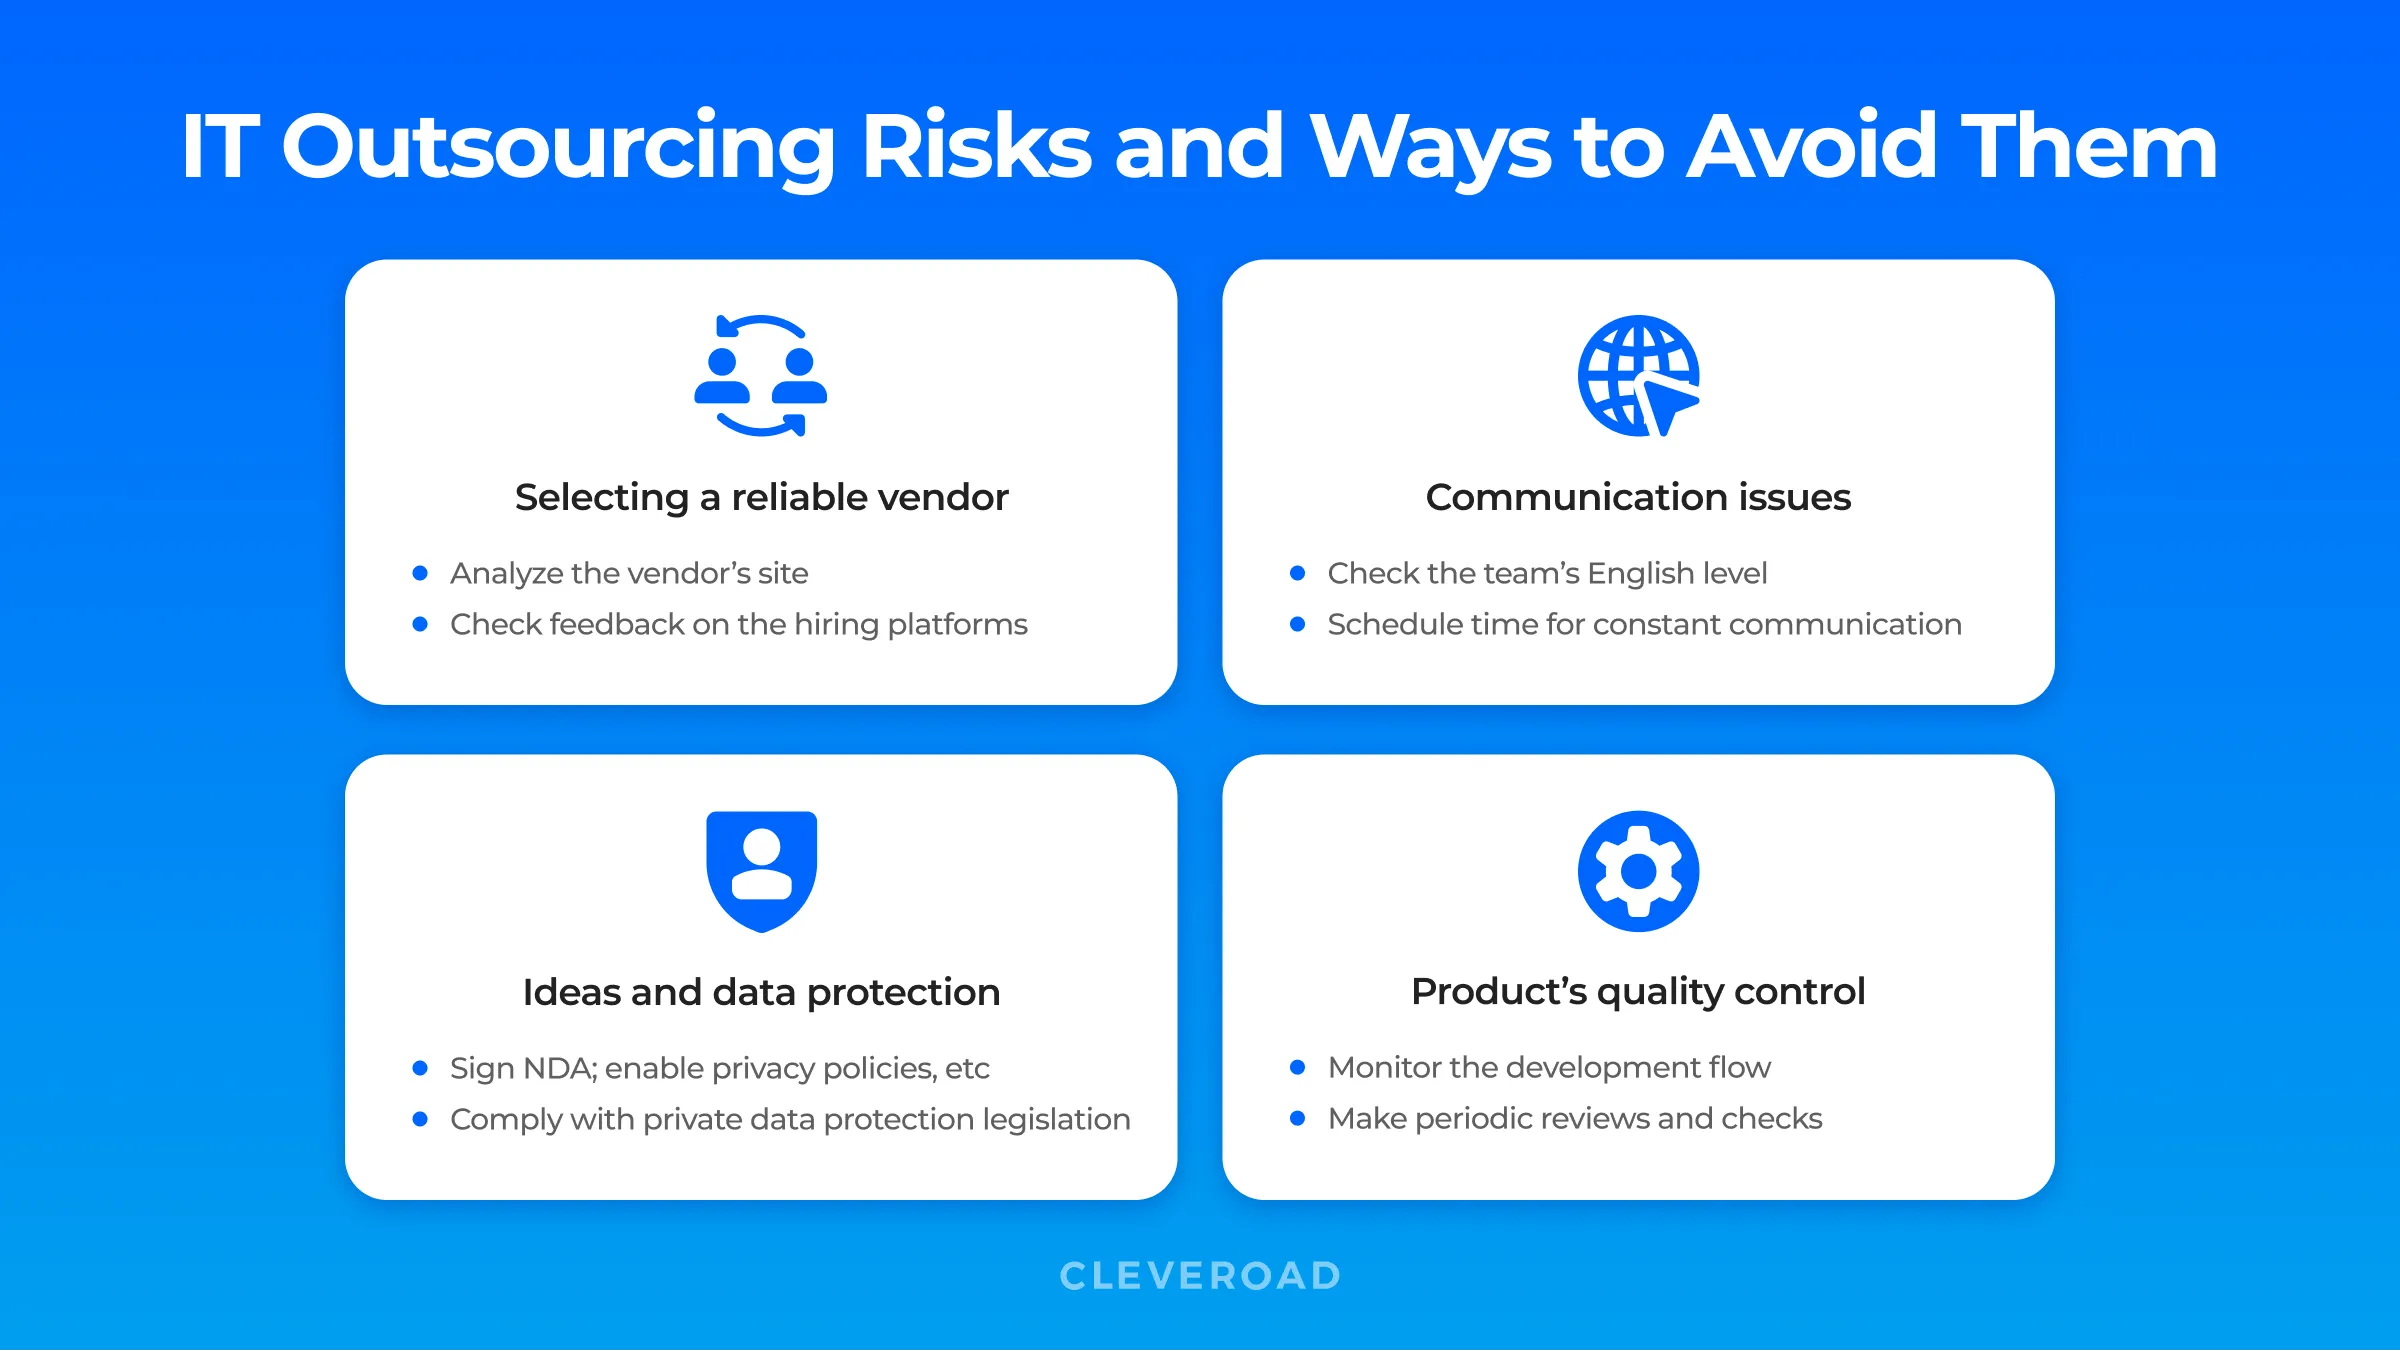 IT outsourcing risks and ways to avoid them